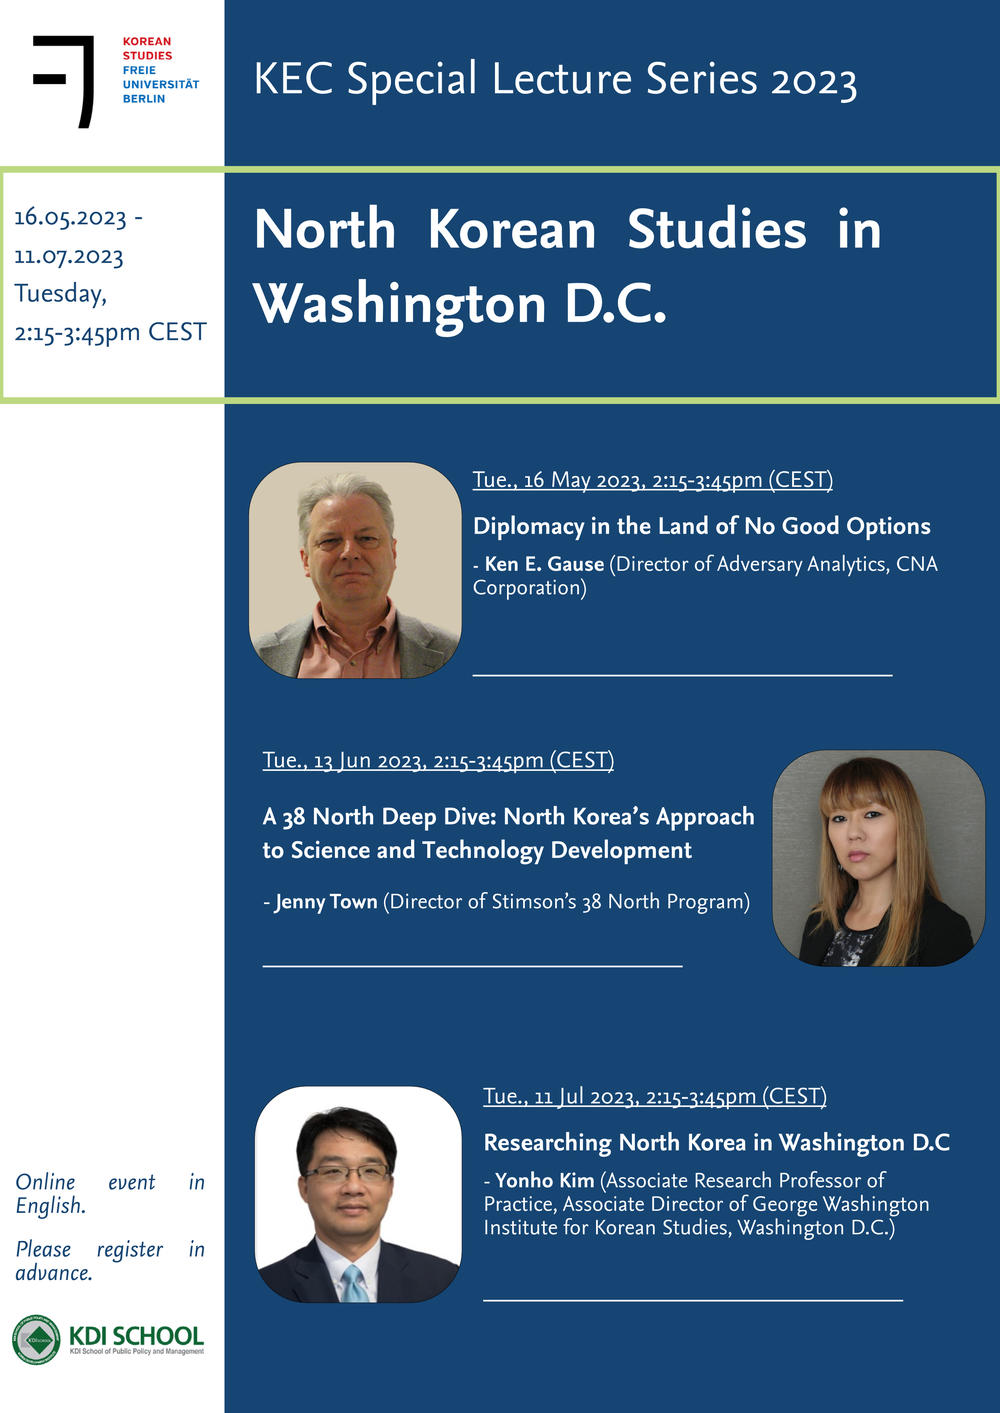 KEC Special Lecture Series on North Korea 2023